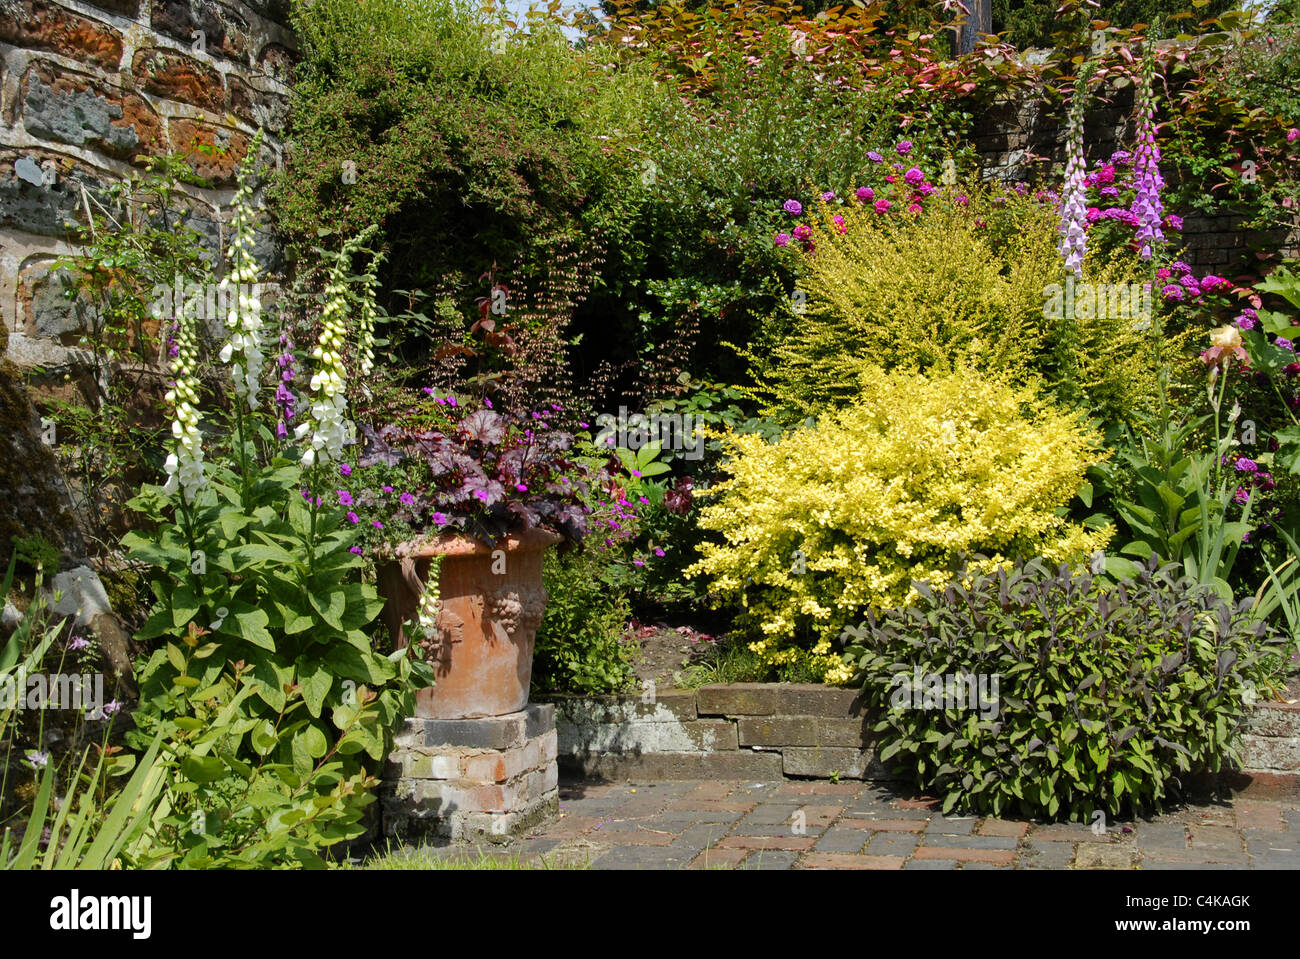 A colorful landscape image of a typical English country garden with a variety of pots and flowers against a brick garden wall. Stock Photo